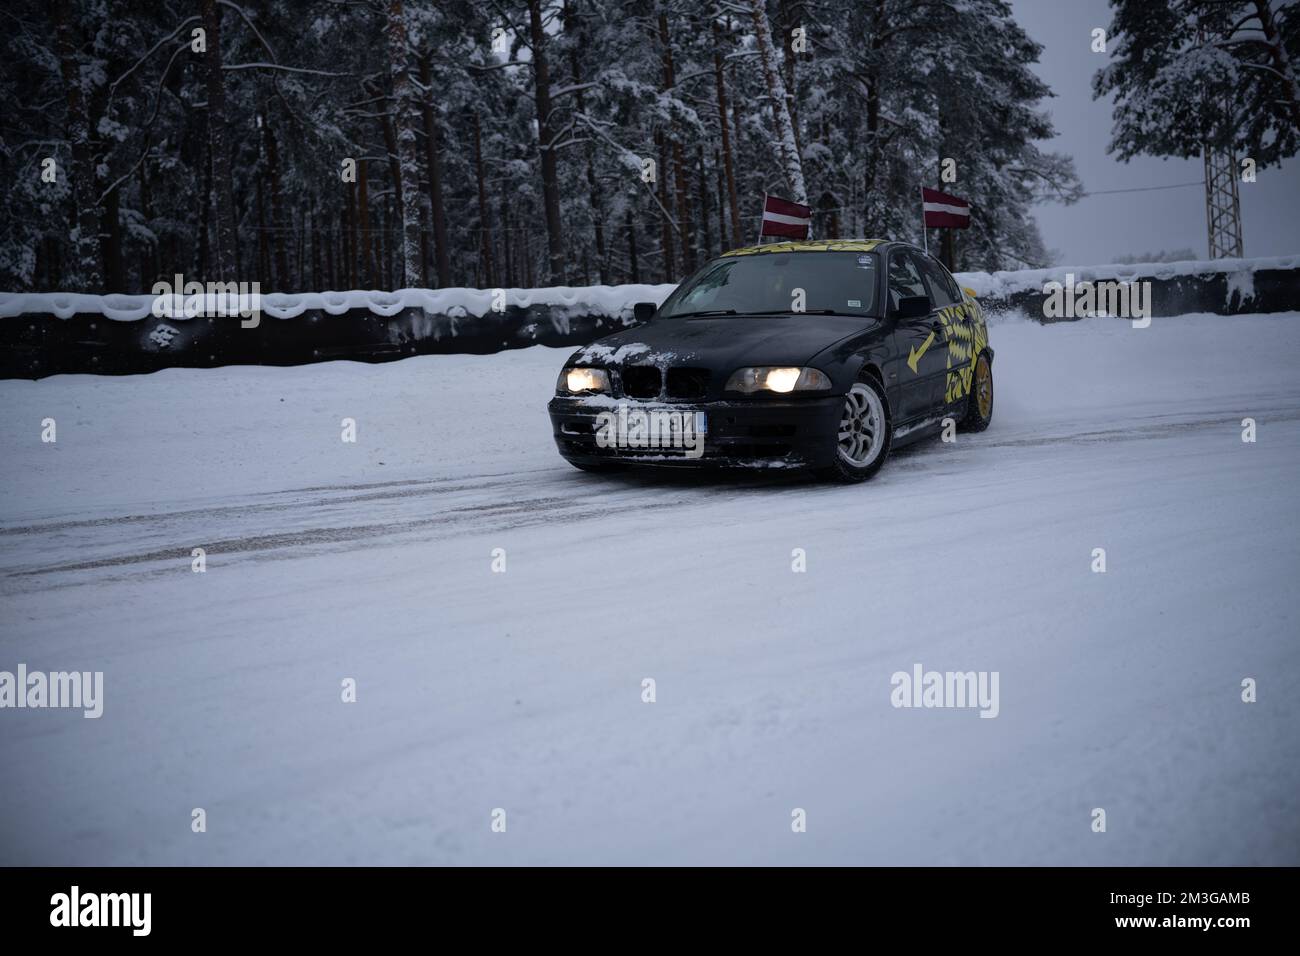 12-12-2022 Riga, Latvia  a car driving down a snowy road in the snow with trees in the background and a flag on top of the car. . Stock Photo